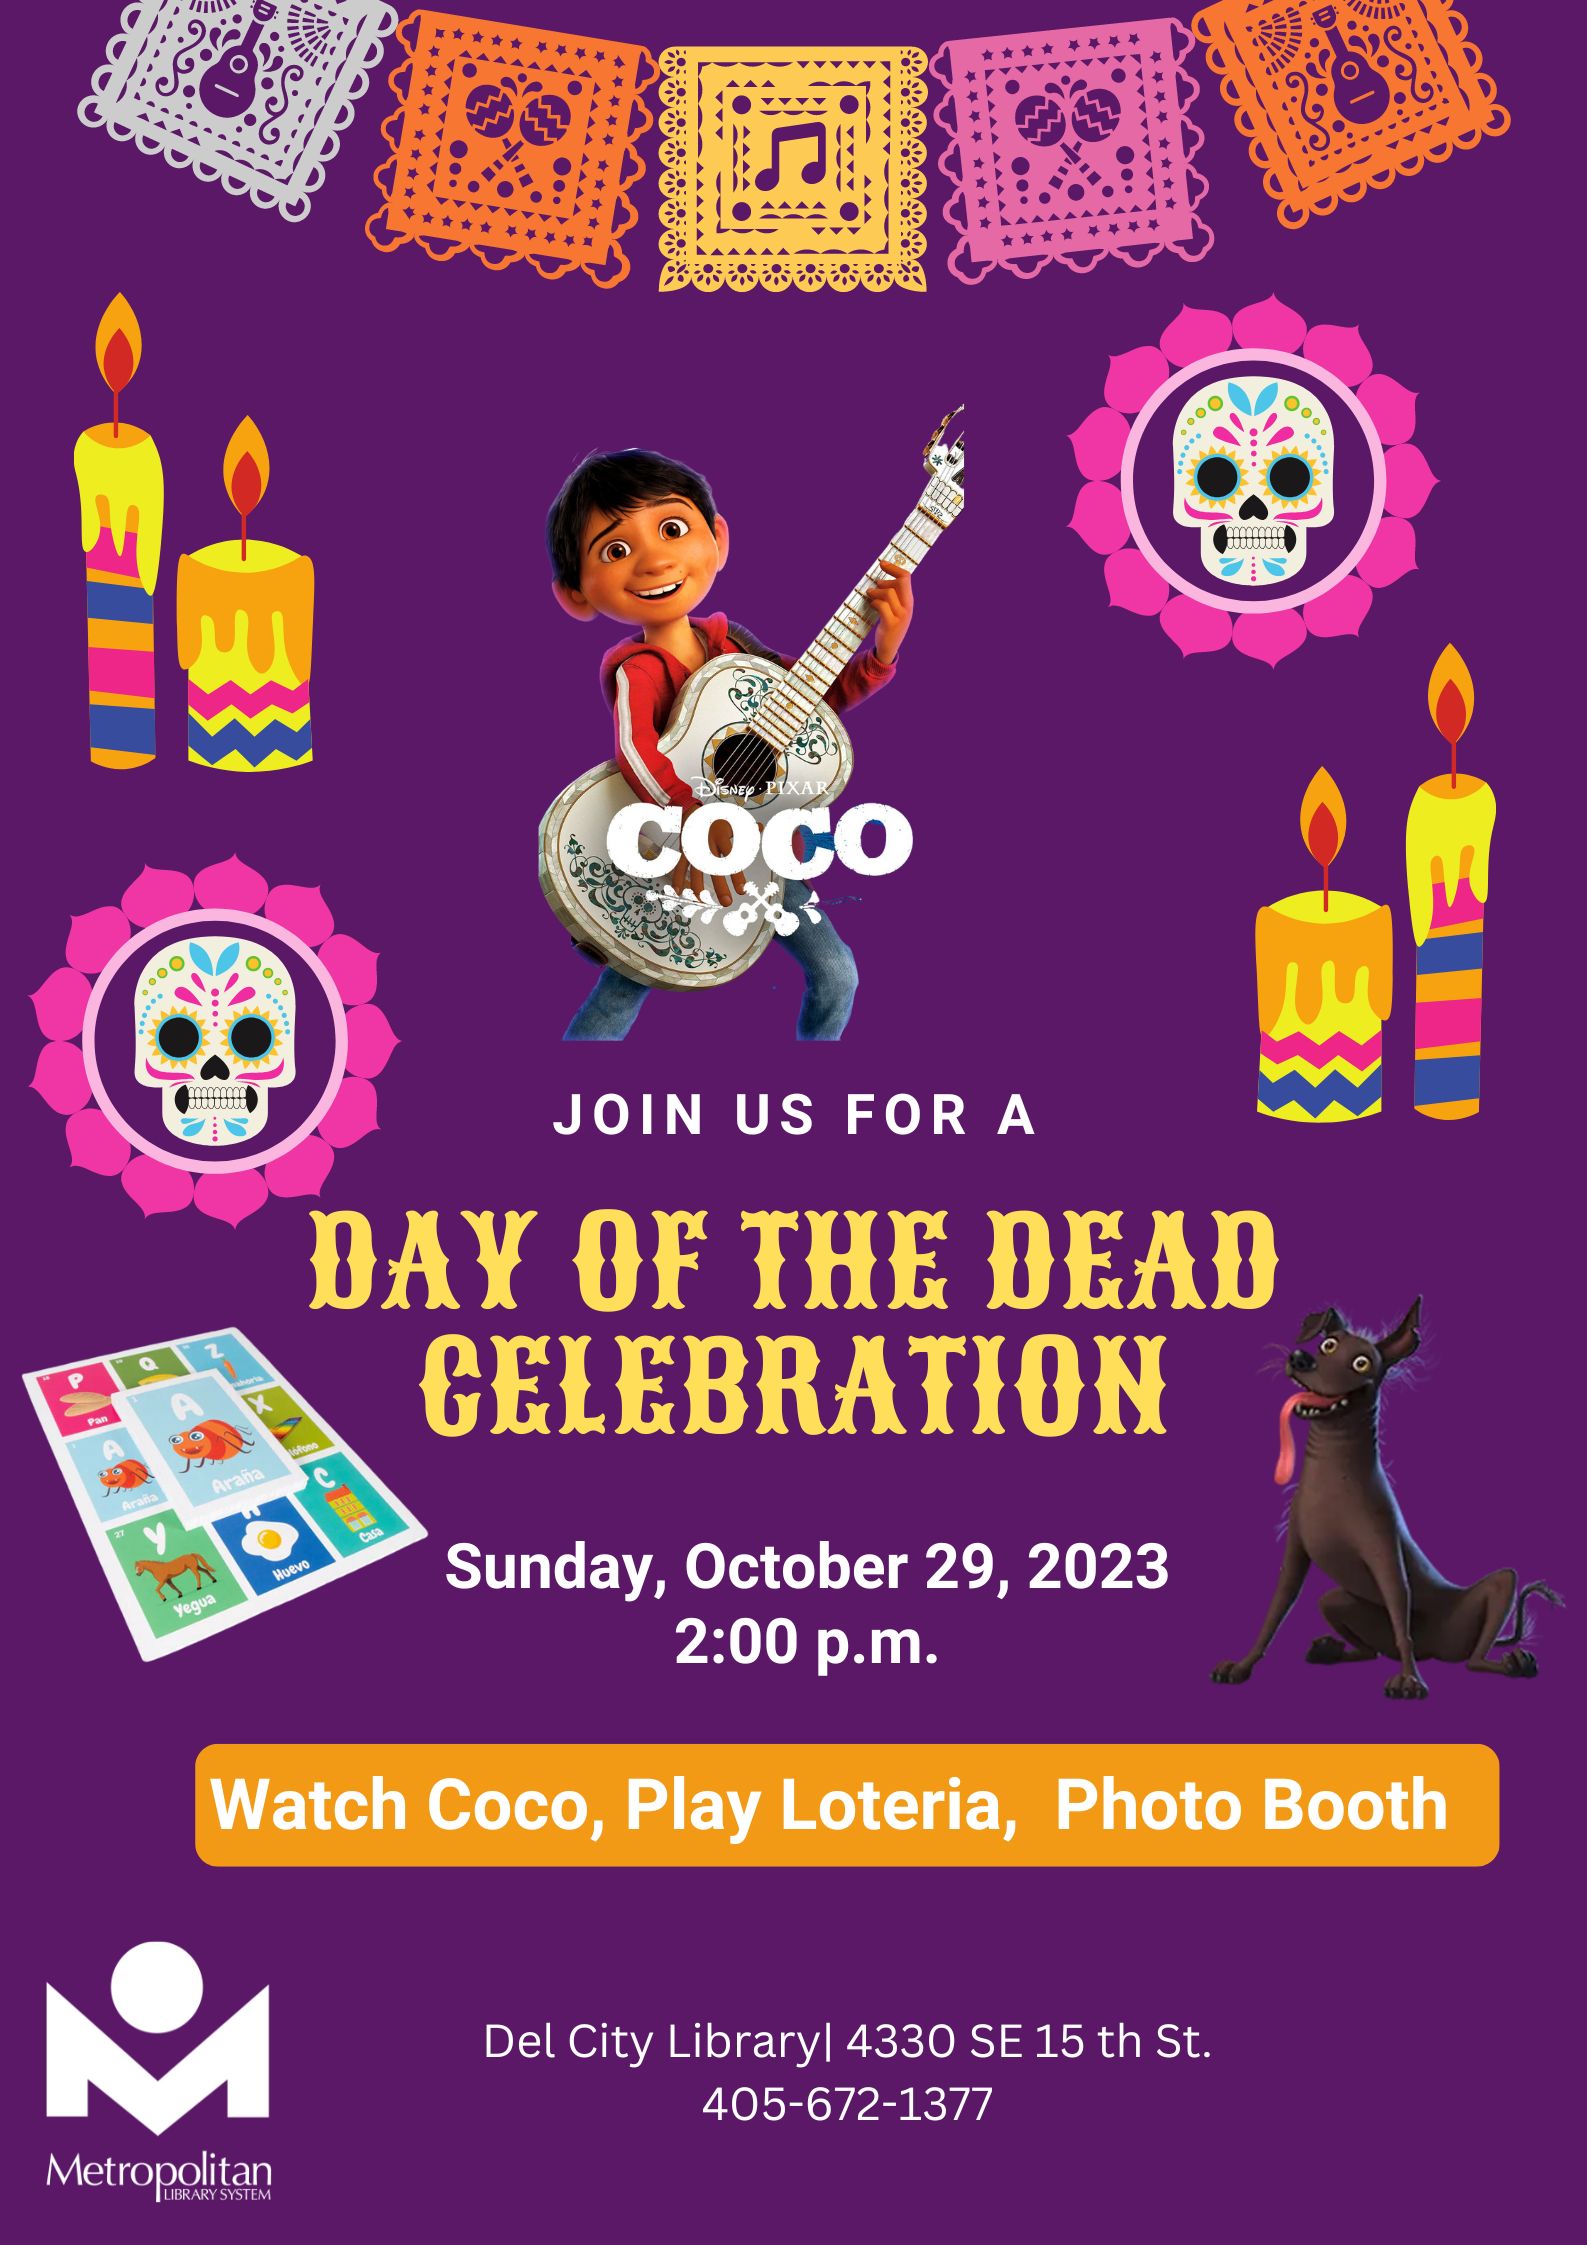 Celebrate Day of the Dead!